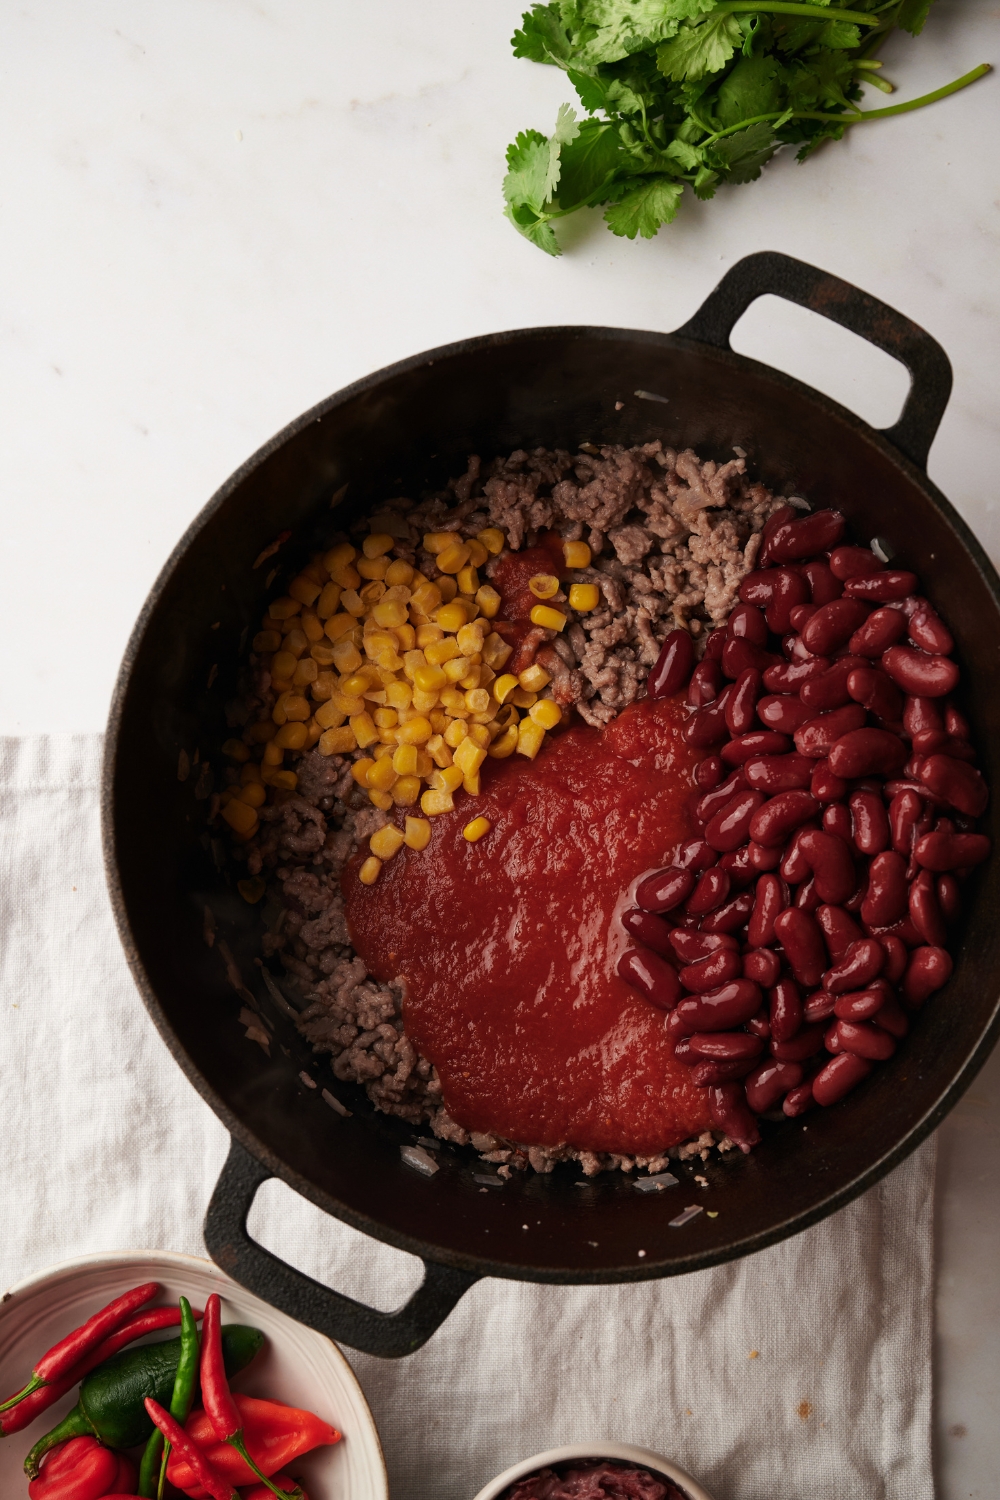 Ingredients for Mexican chili in a black pot